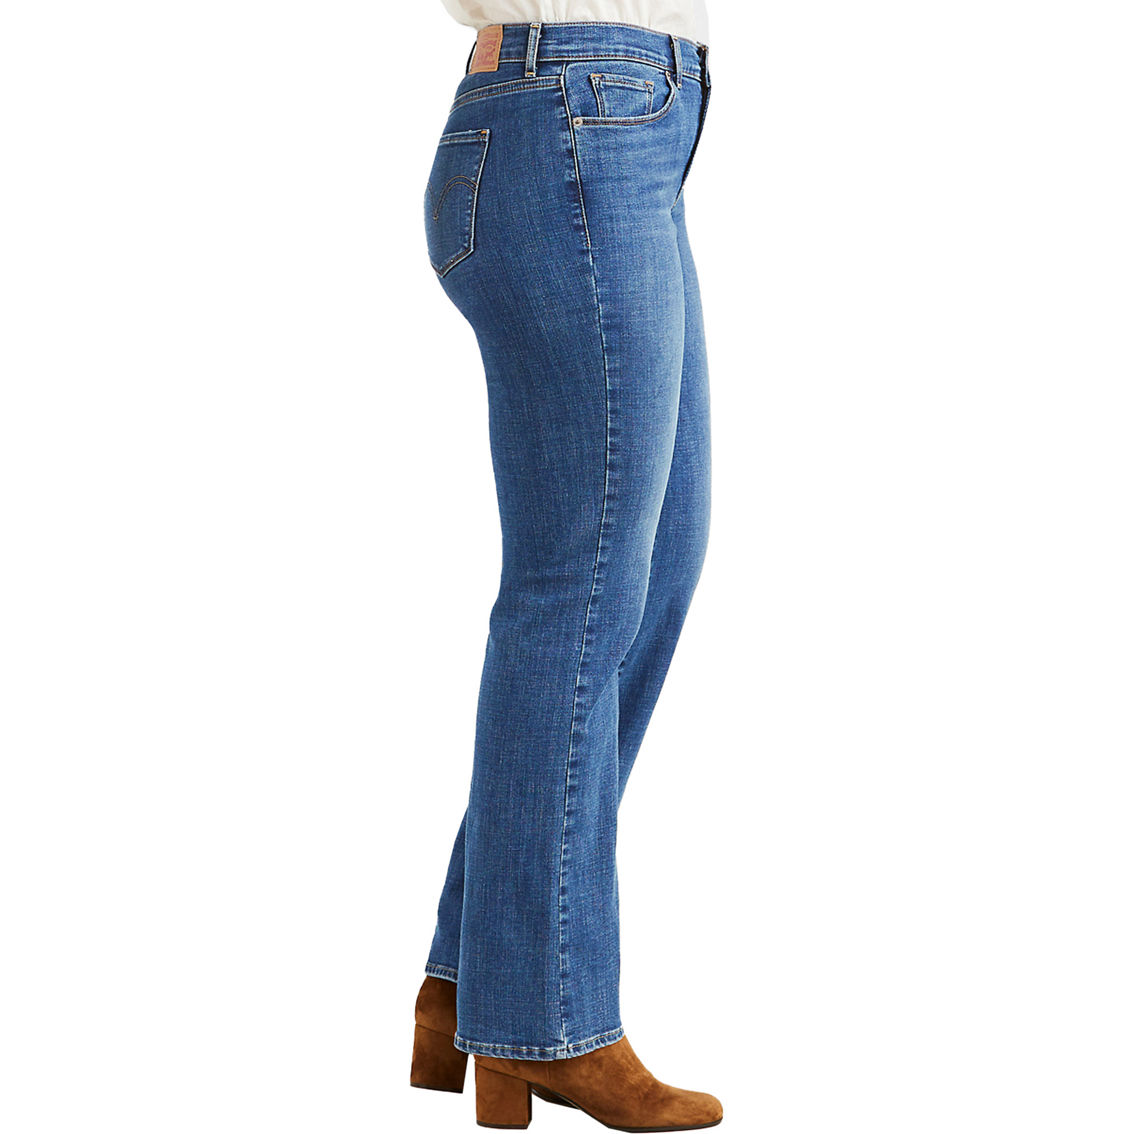 Levi's Classic Bootcut Jeans - Image 3 of 3